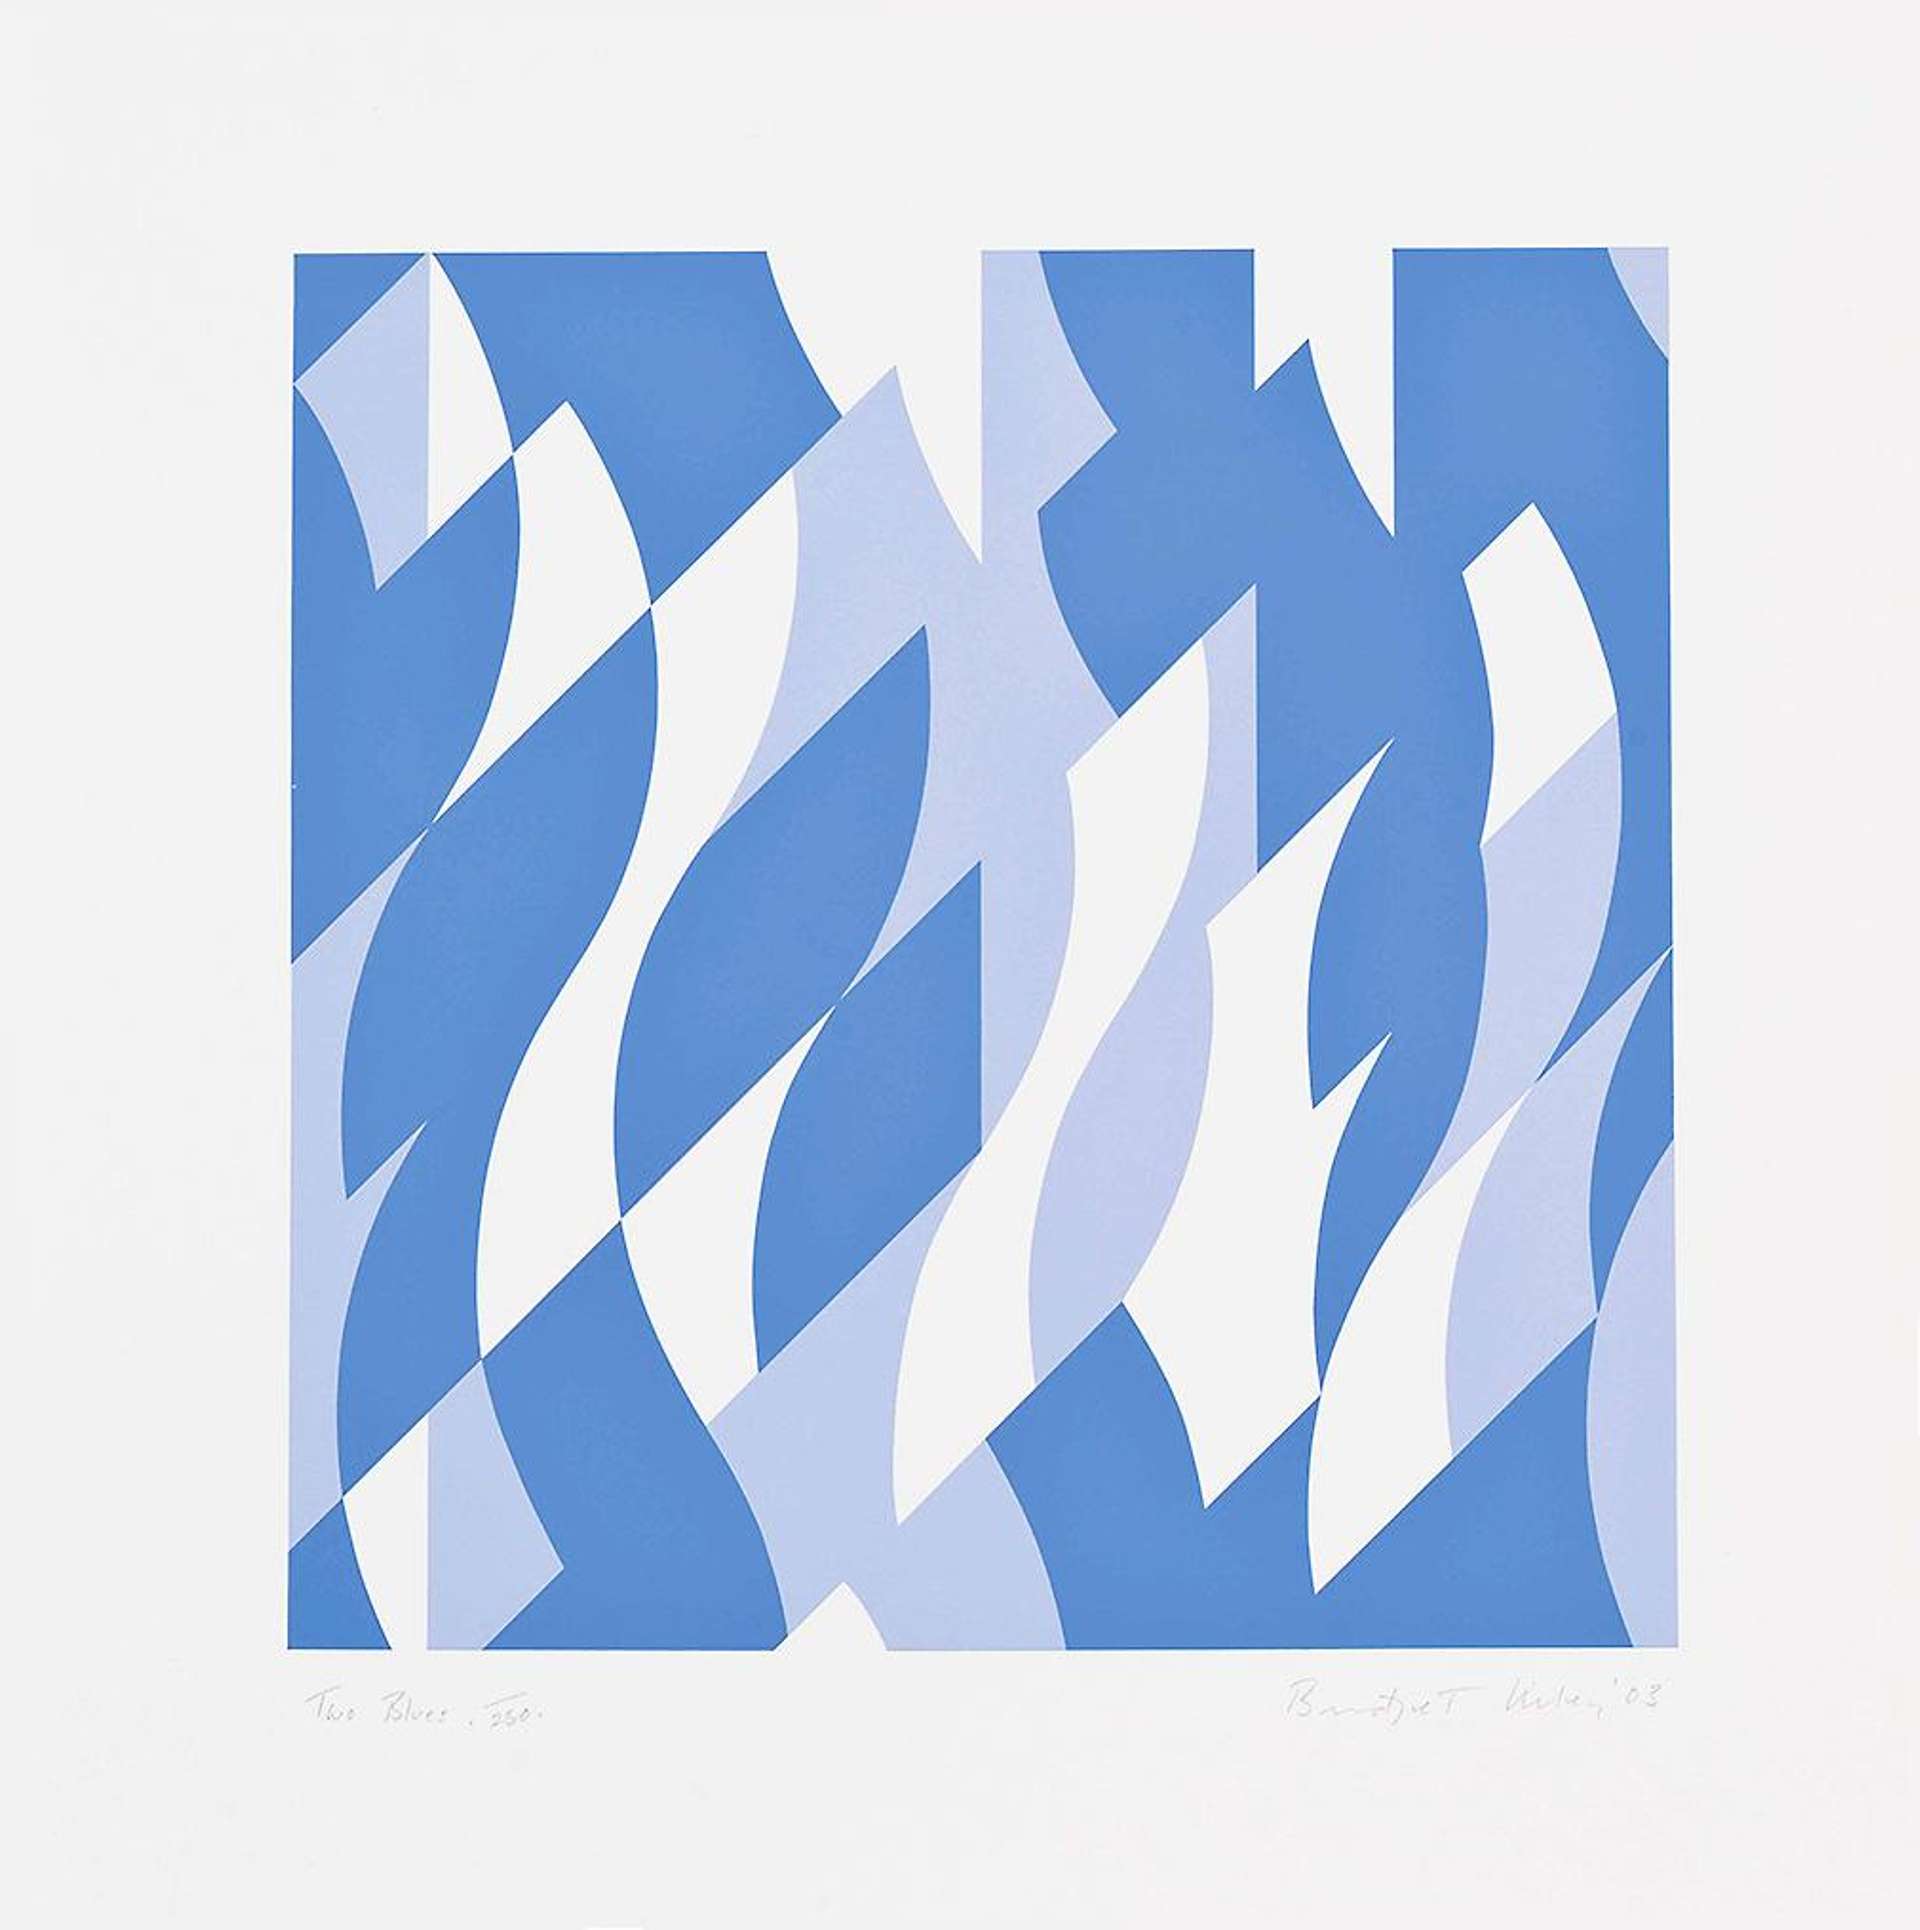 Bridget Riley’s Two Blues. An abstract pattern of geometric shapes in a variety of blue hues.